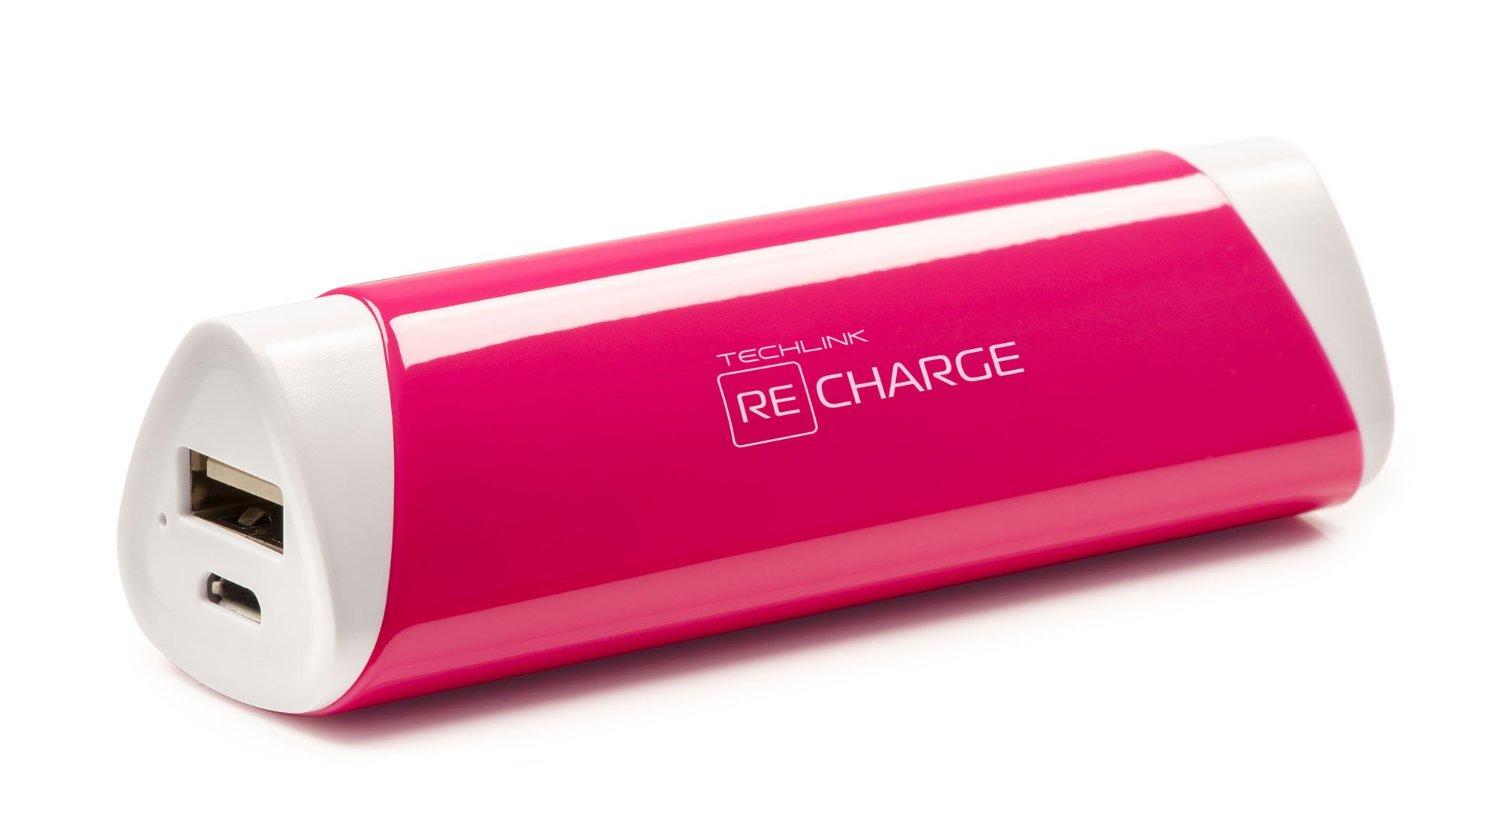 Techlink ReCharge 2600 Battery Power USB Portable Charger Pink